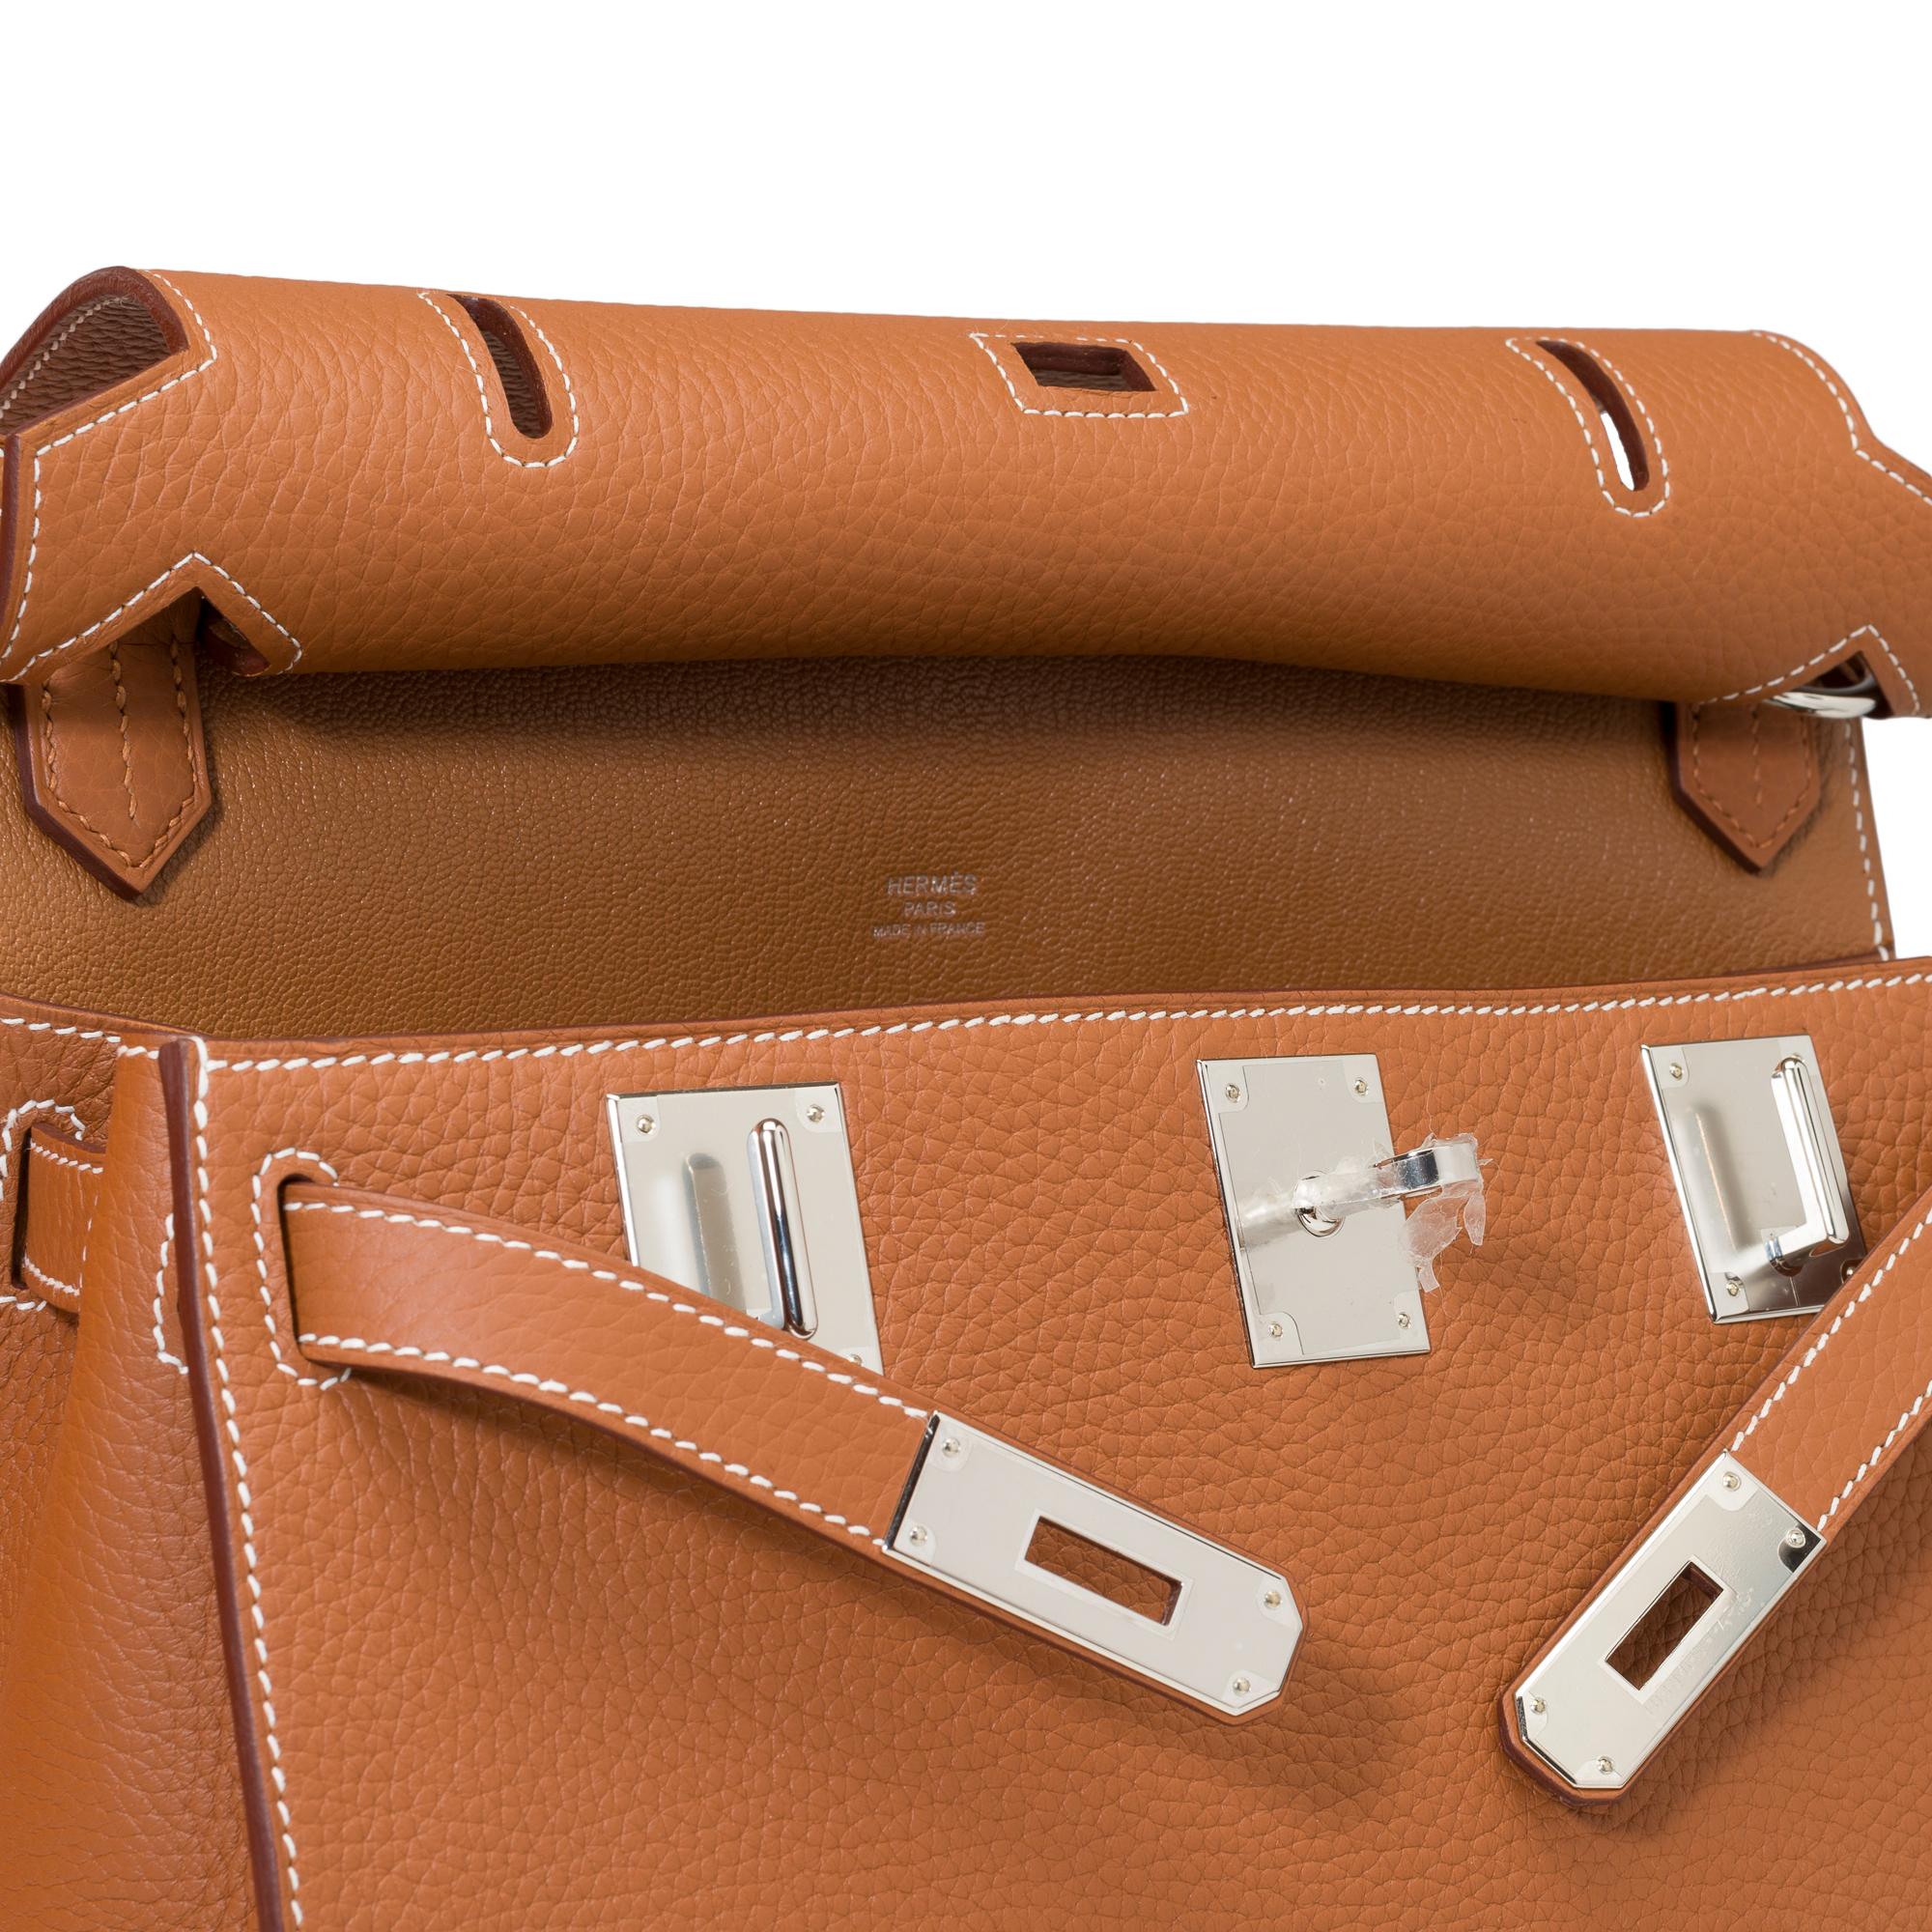 New Hermès Jypsière 28 crossbody bag in Gold Taurillon Clemence leather, PHW For Sale 3